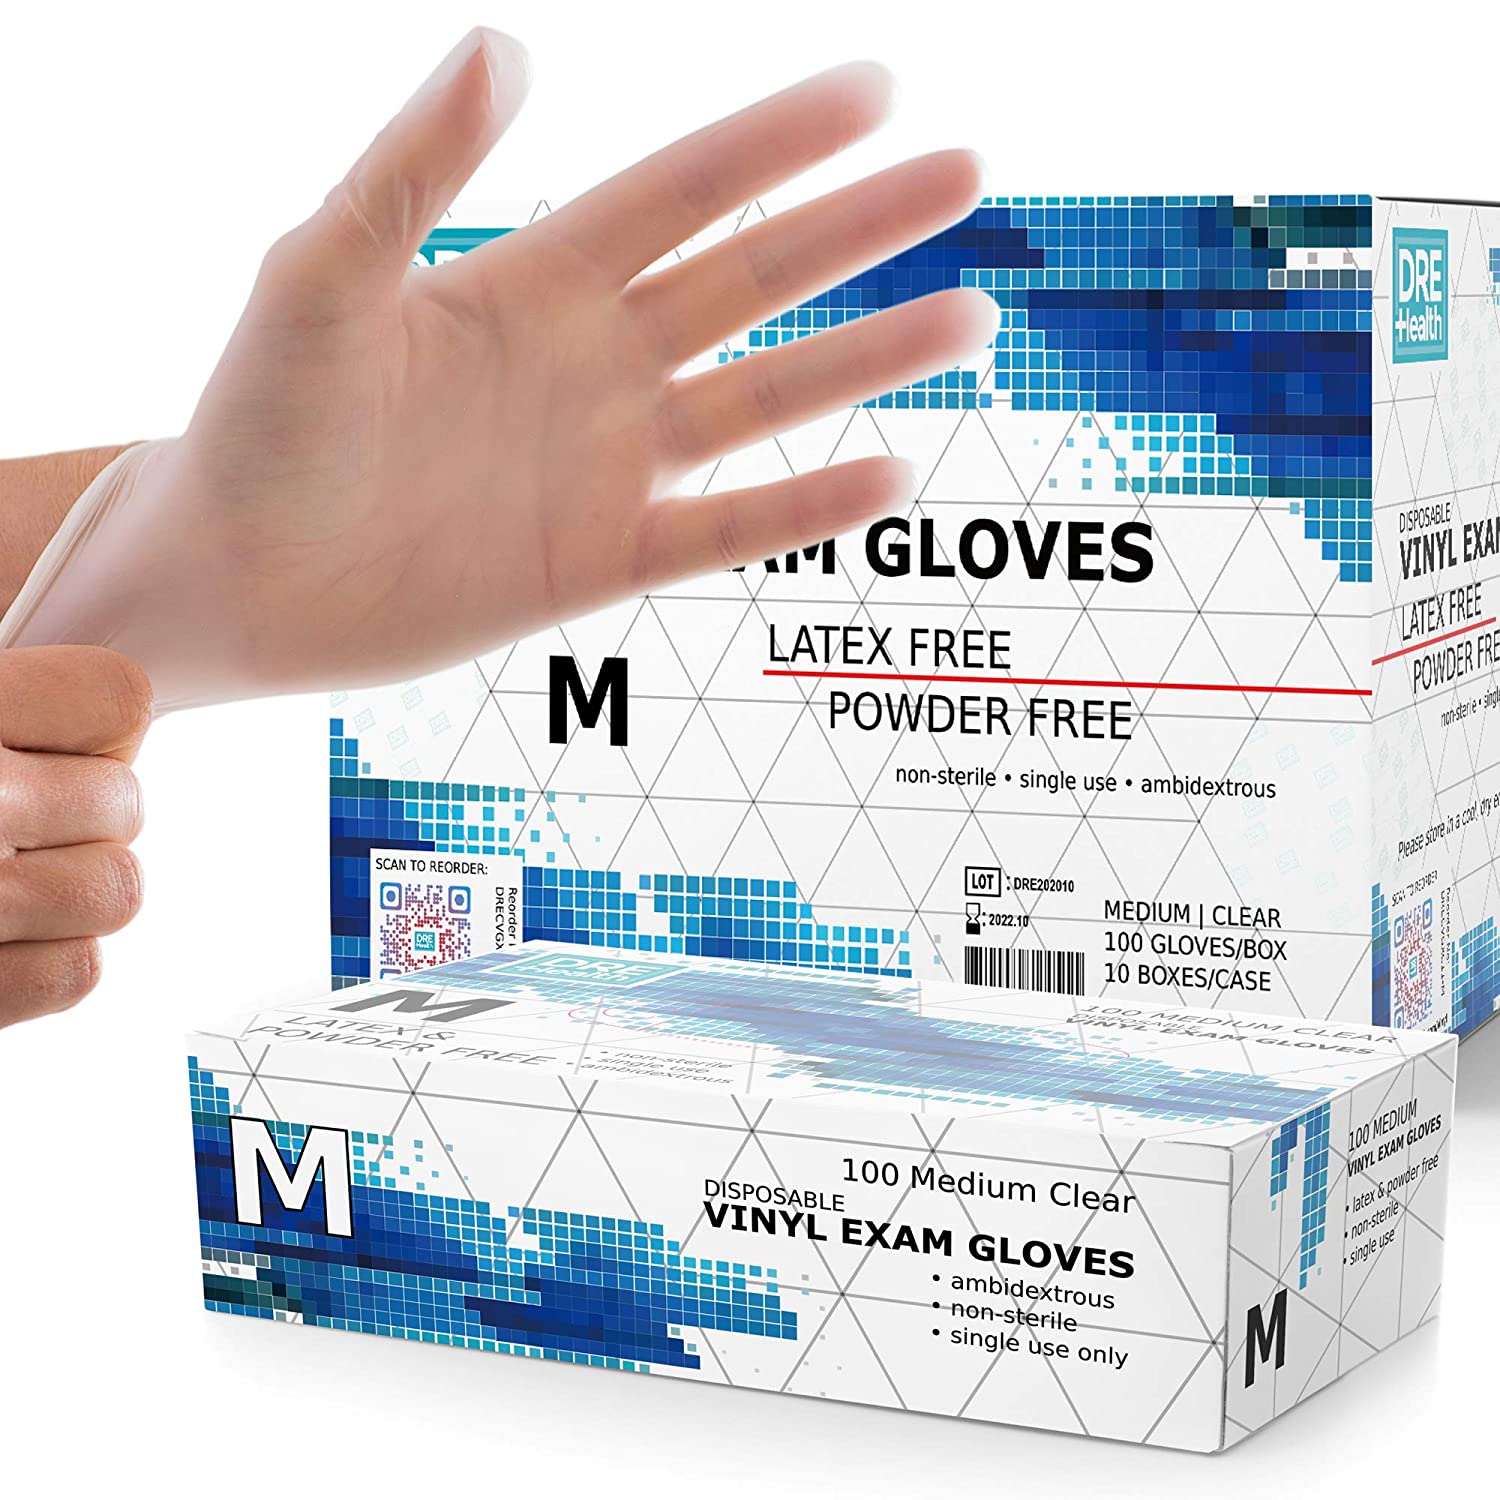 Powder Free Disposable Gloves Medium, 1000 Count -4 Mil Clear Vinyl Gloves- Extra Strong, 4 Mil Thick - Latex Free, Food Safe - Medical Exam Gloves, Cleaning Gloves - 50 Boxes of 100